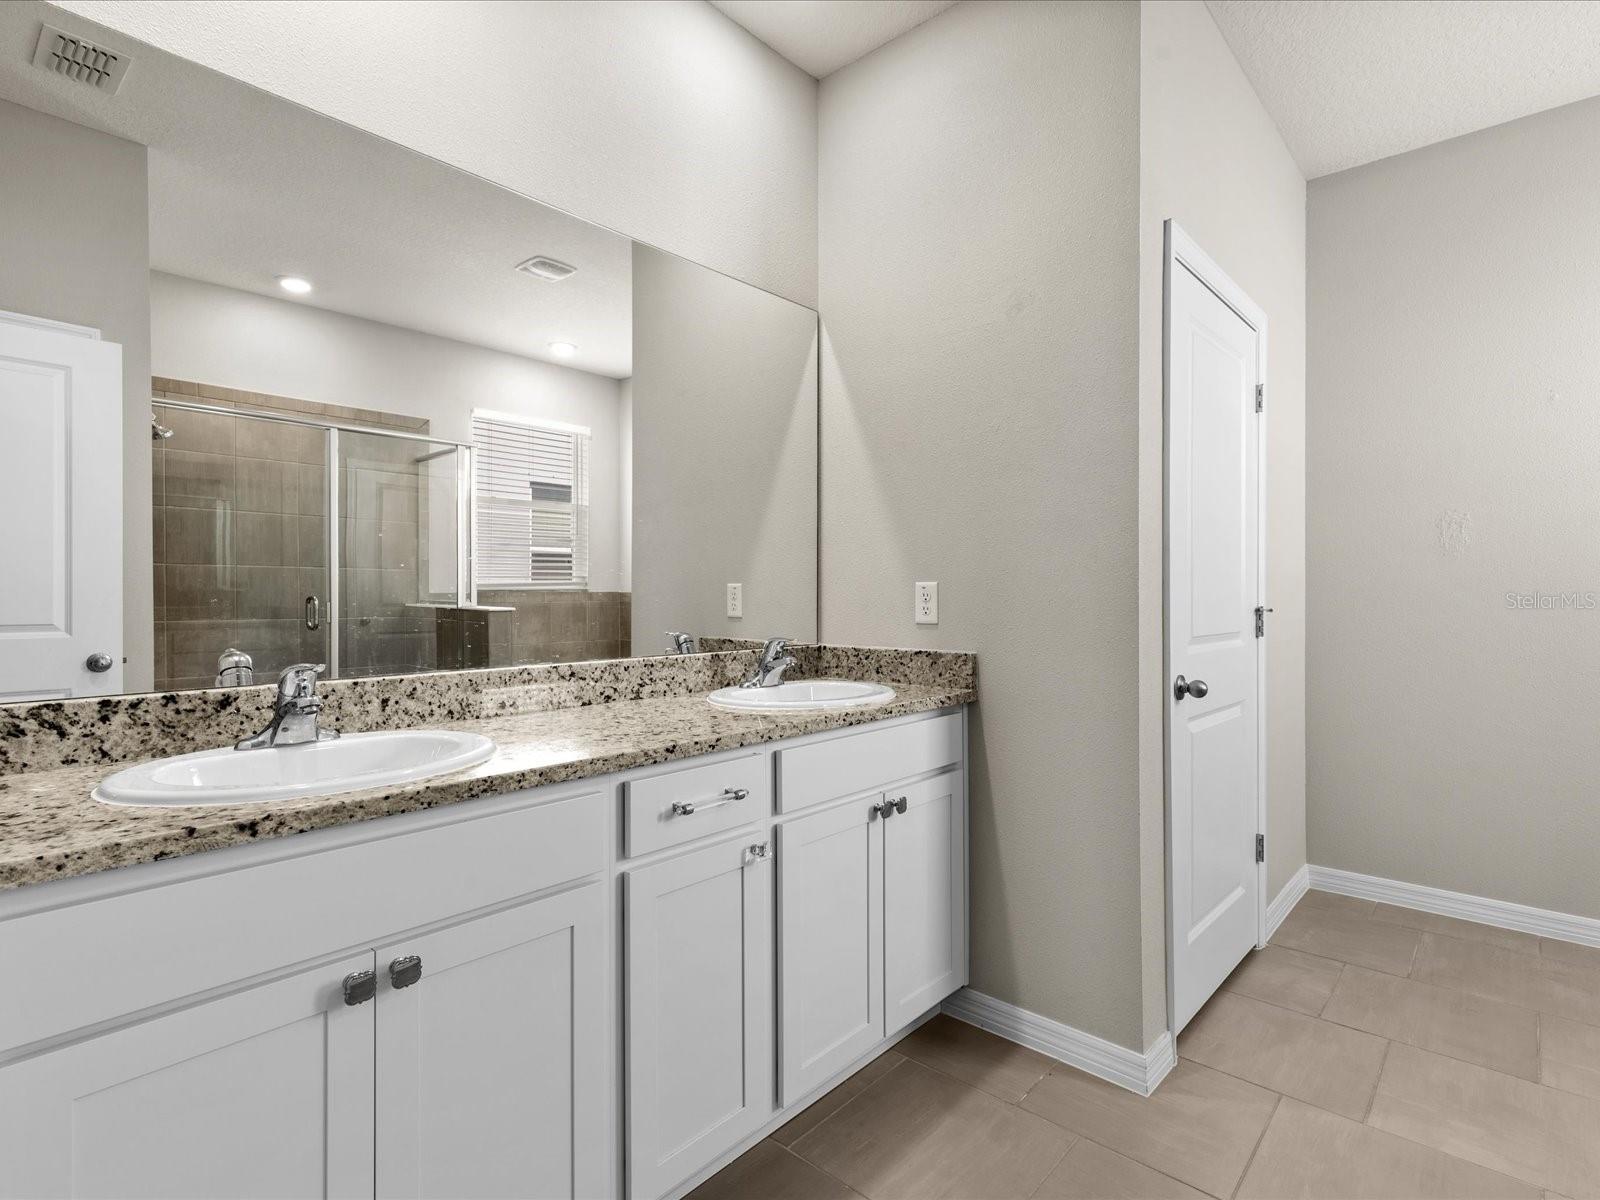 Primary Ensuite Bath featuring Dual Vanity and private Water Closet